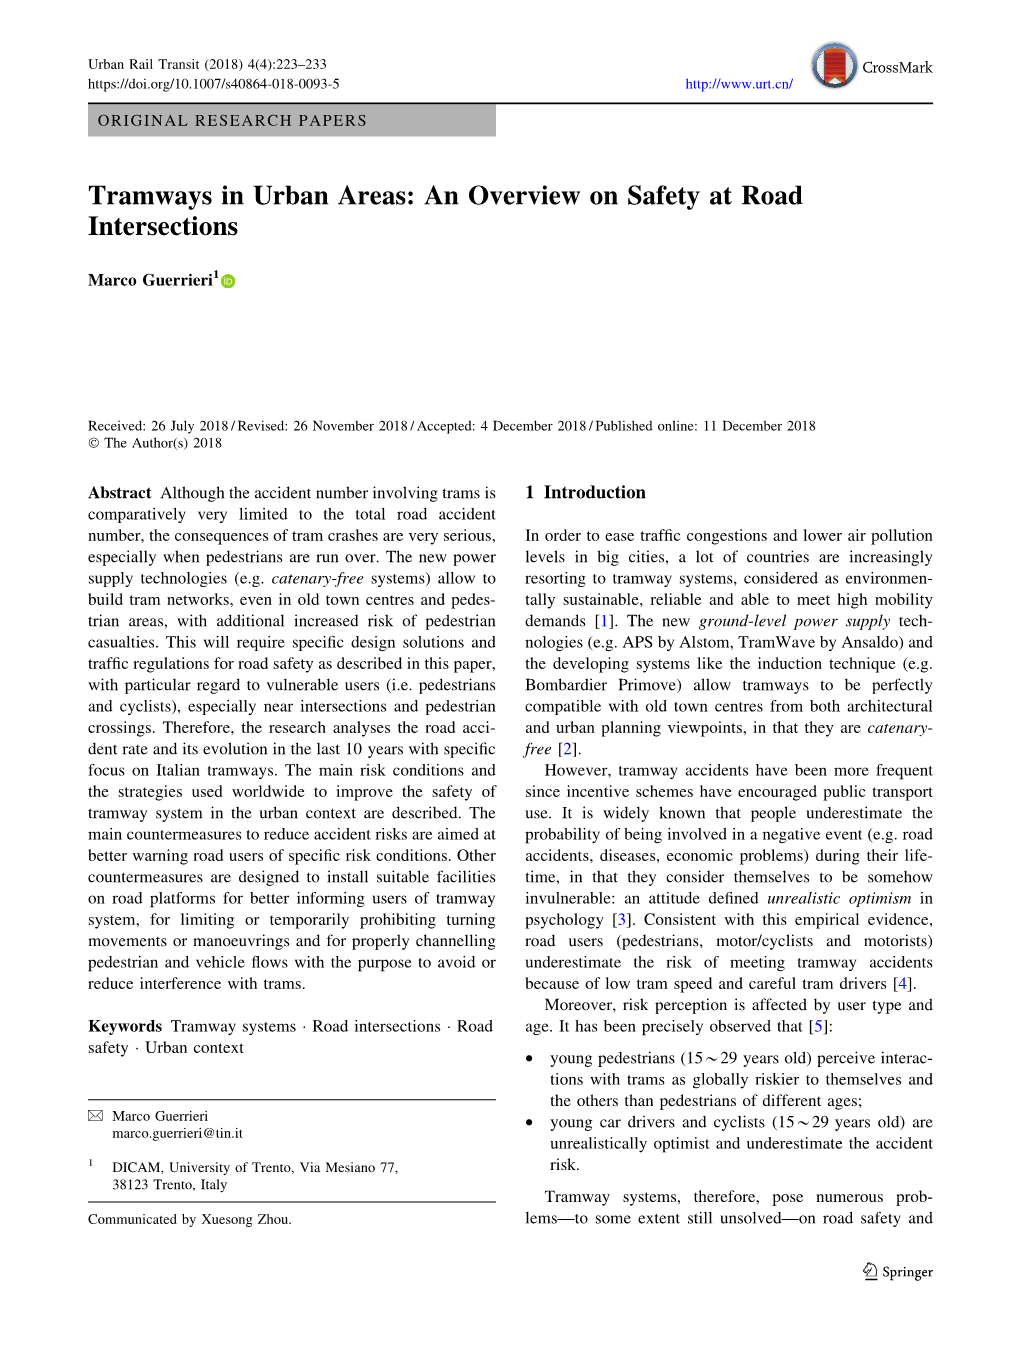 Tramways in Urban Areas: an Overview on Safety at Road Intersections